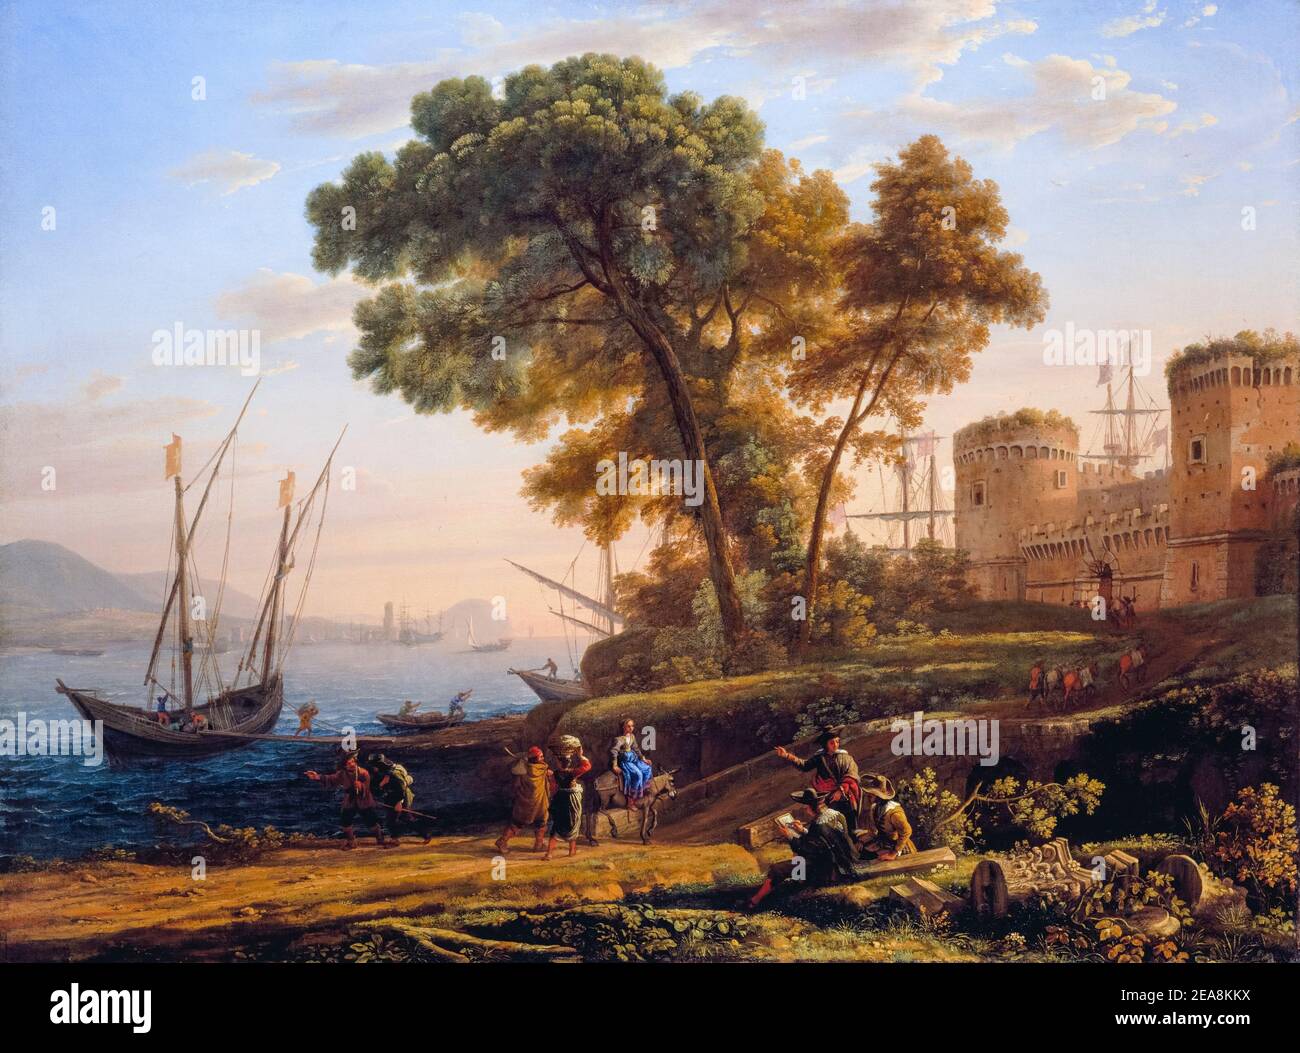 Claude Lorrain, An Artist Studying from Nature, landscape painting, 1639 Stock Photo